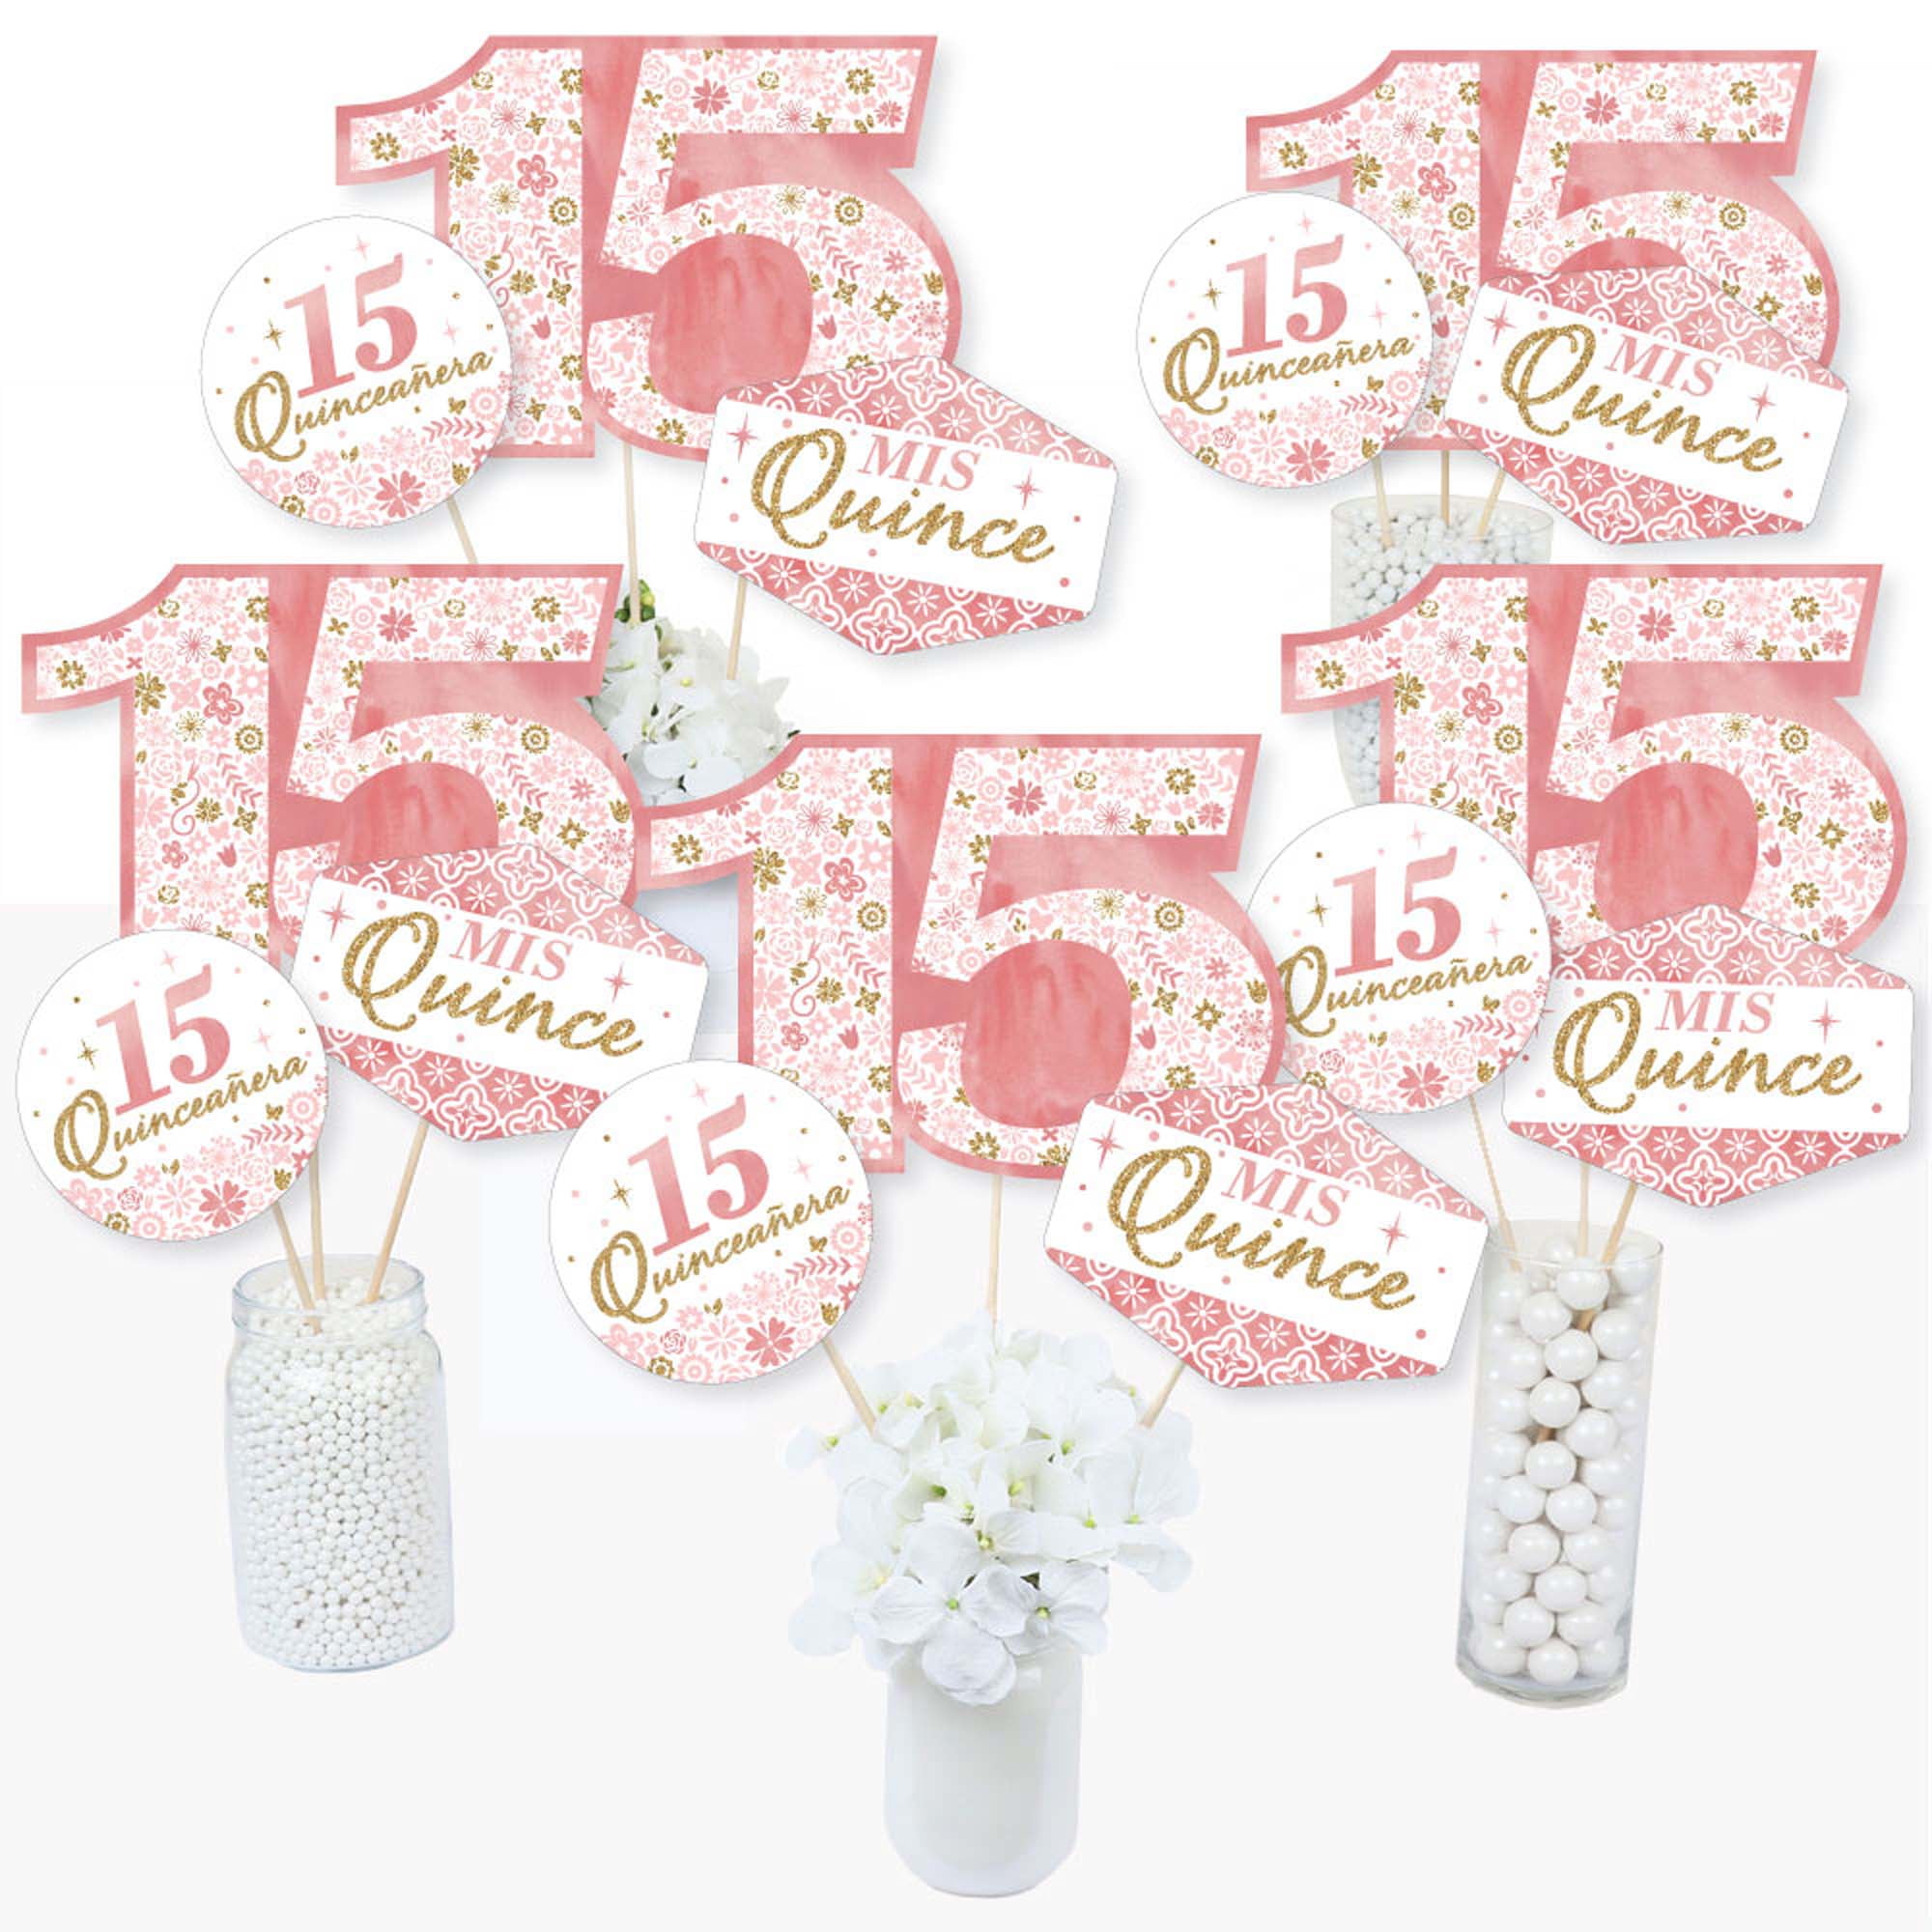 15th Birthday Decorations Girl - Recuerdos para 15 Anos Quinceanera  Decorations | Photo Booth Props Backdrop Foil Fringe Curtain Banner | Happy